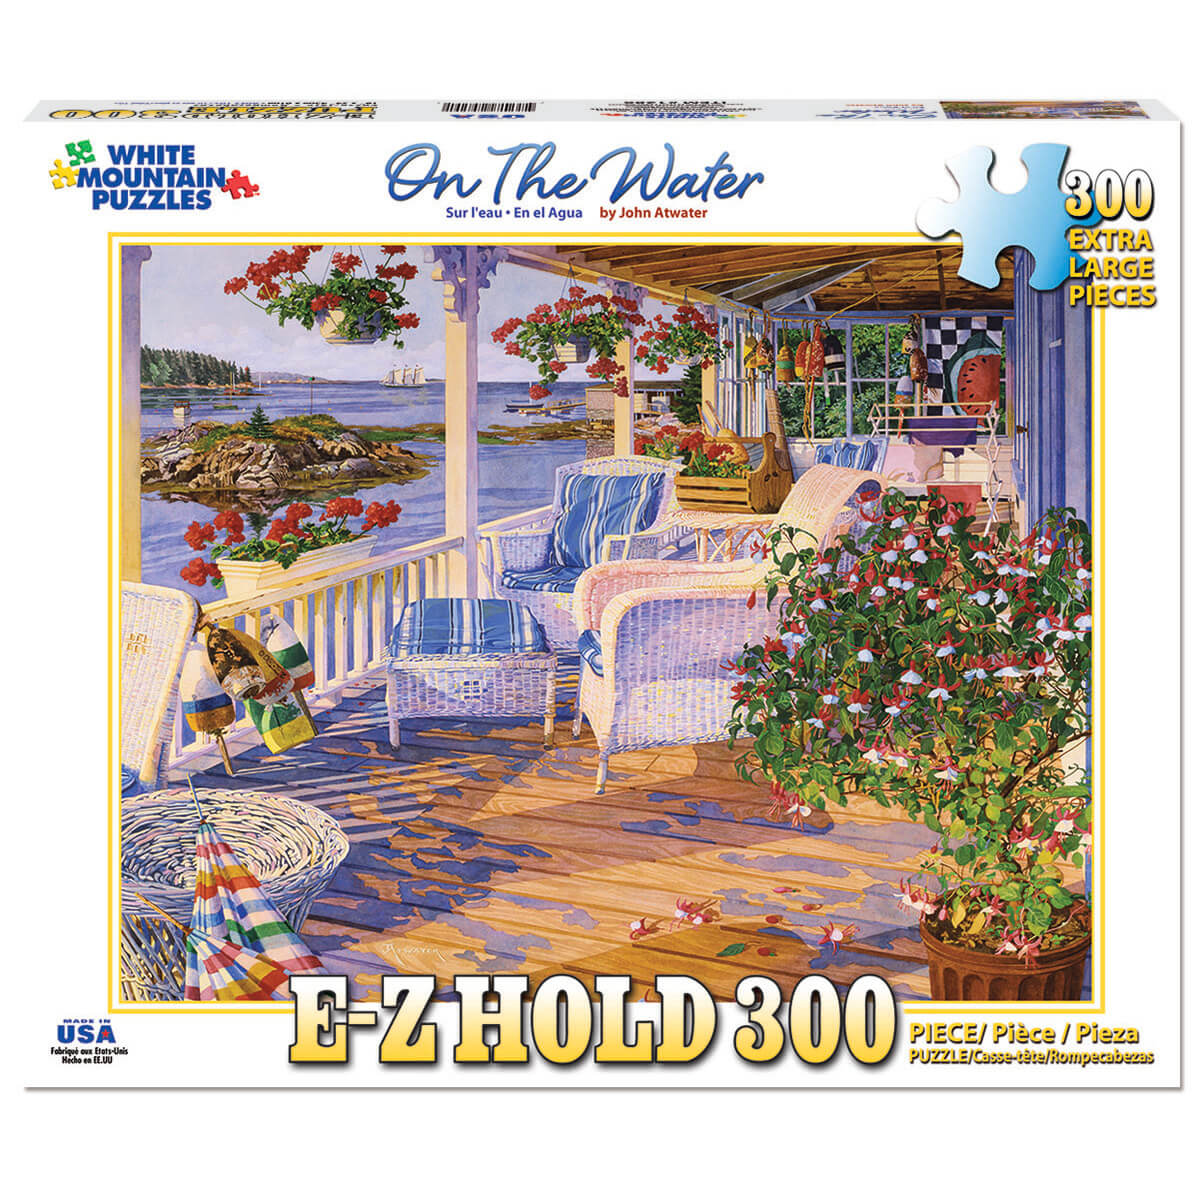 White Mountain Puzzles On The Water 300 Piece Jigsaw Puzzle